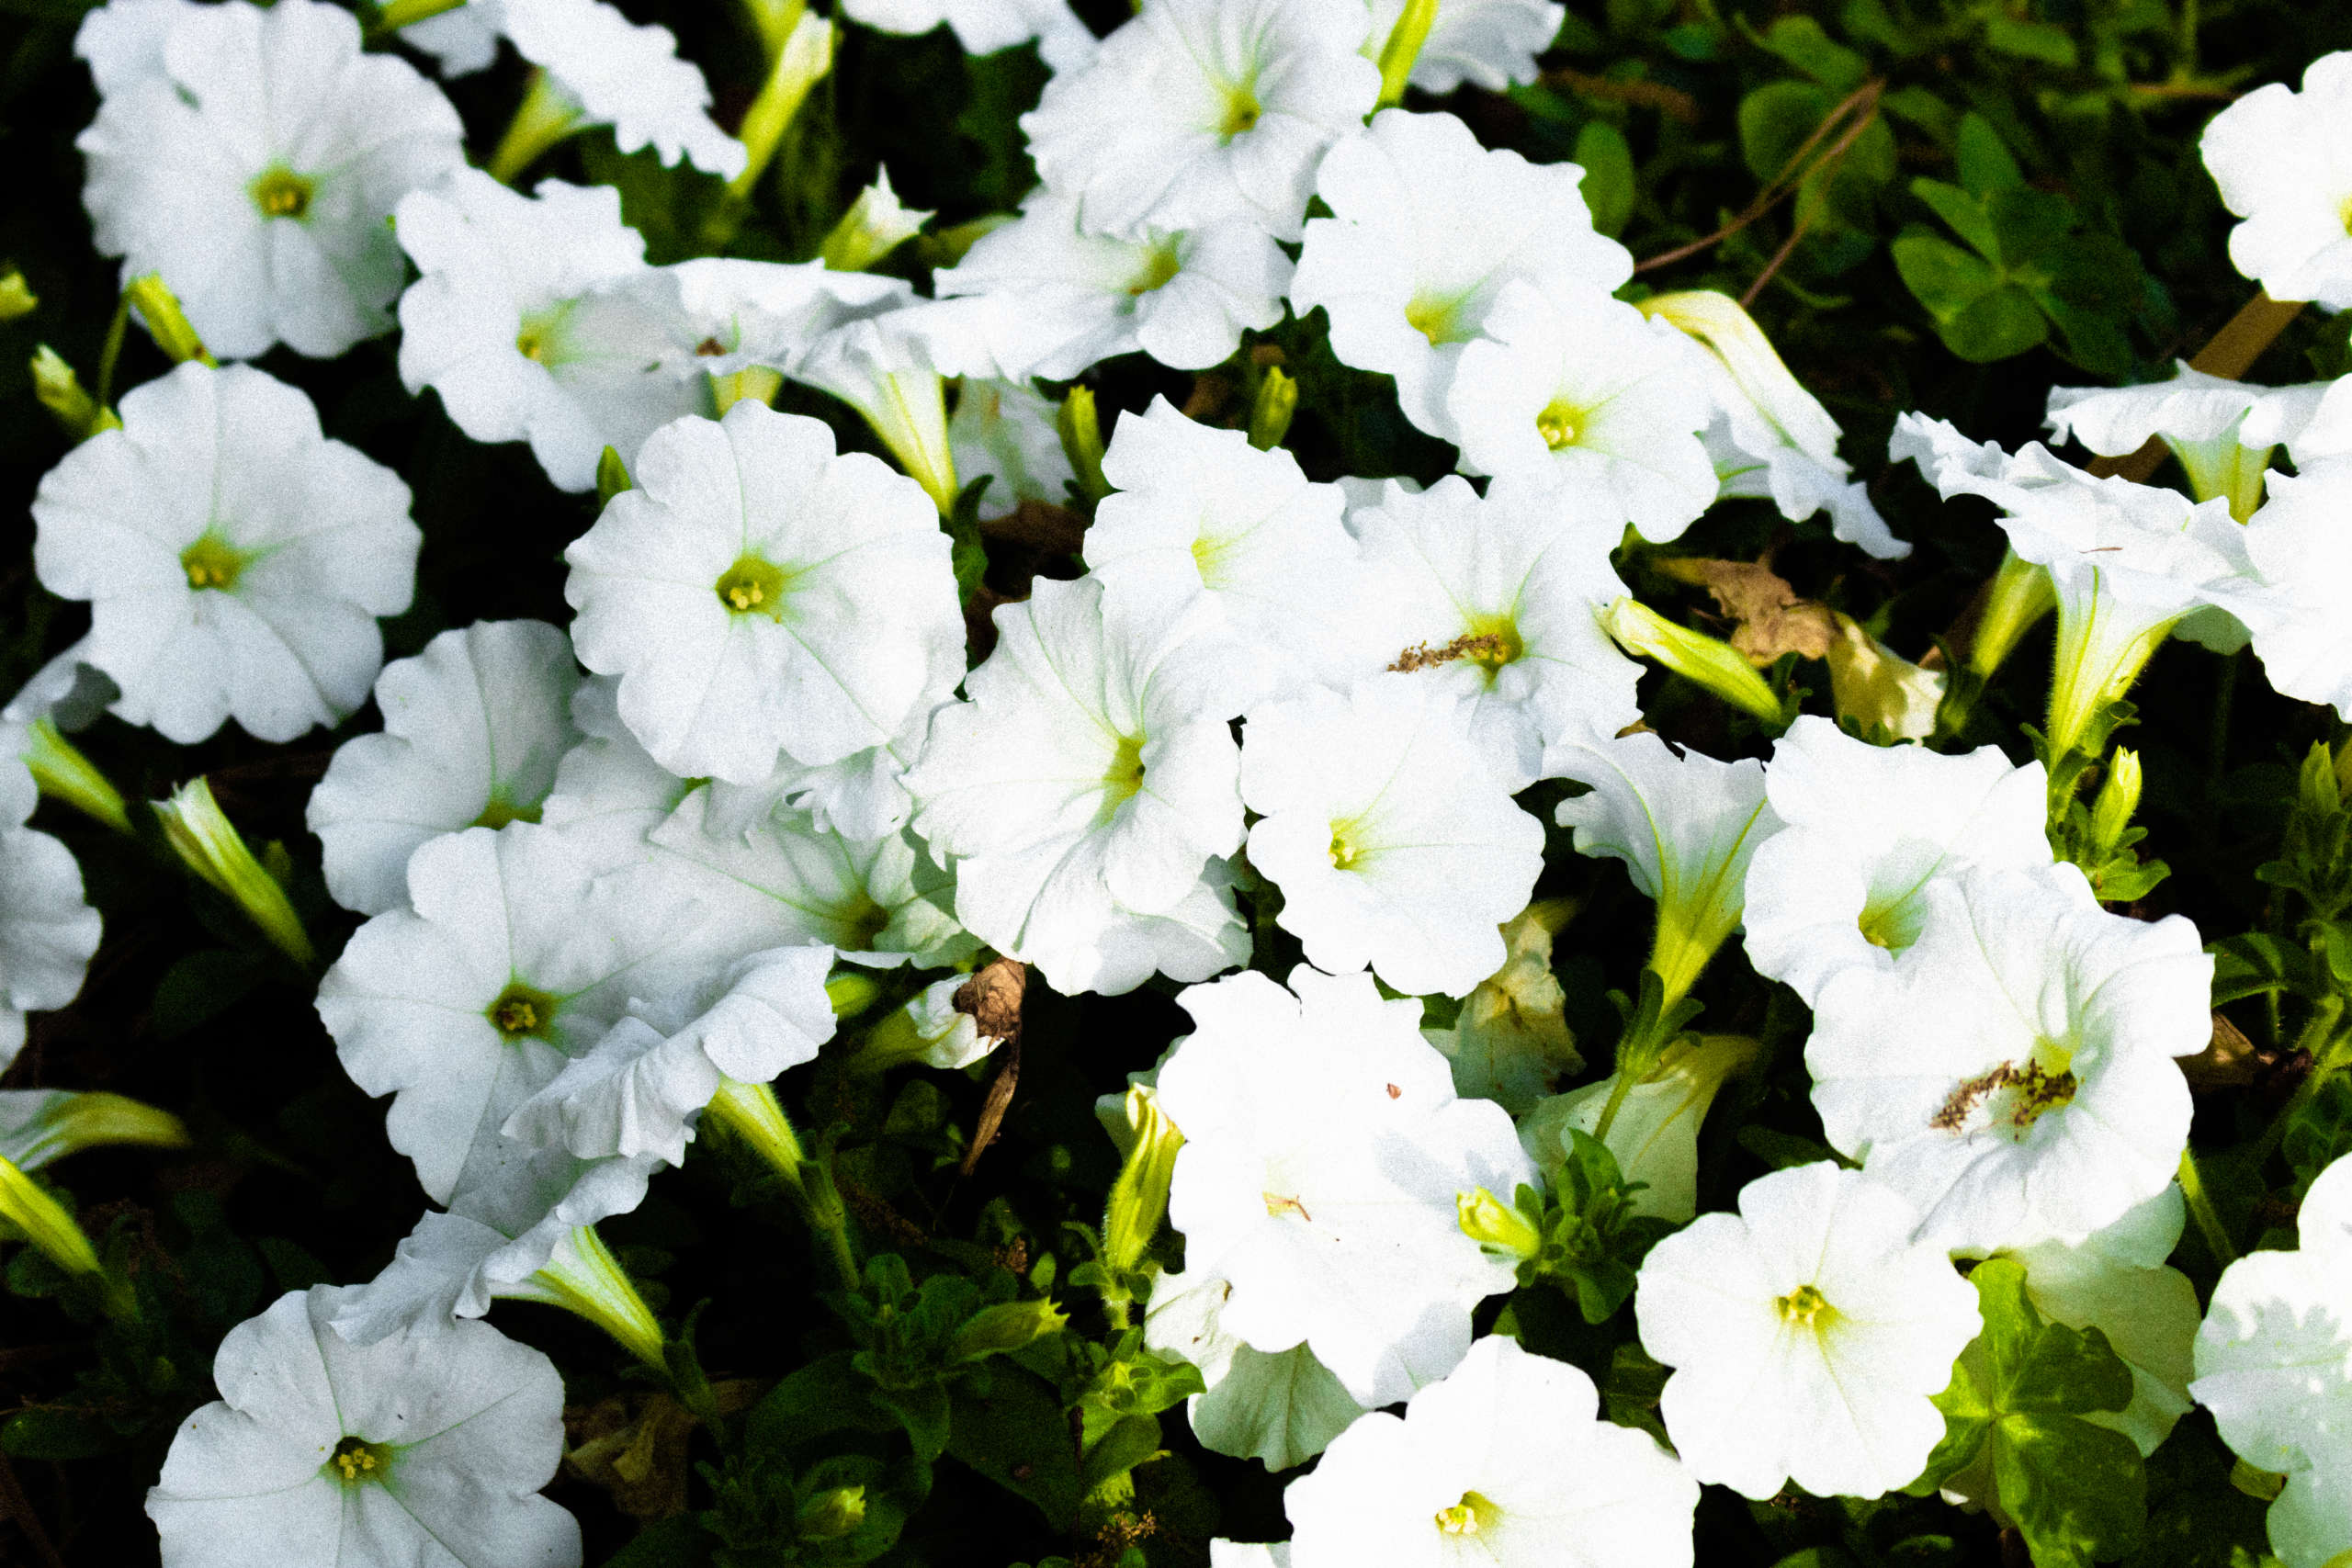 A patch of white petunia flowers.